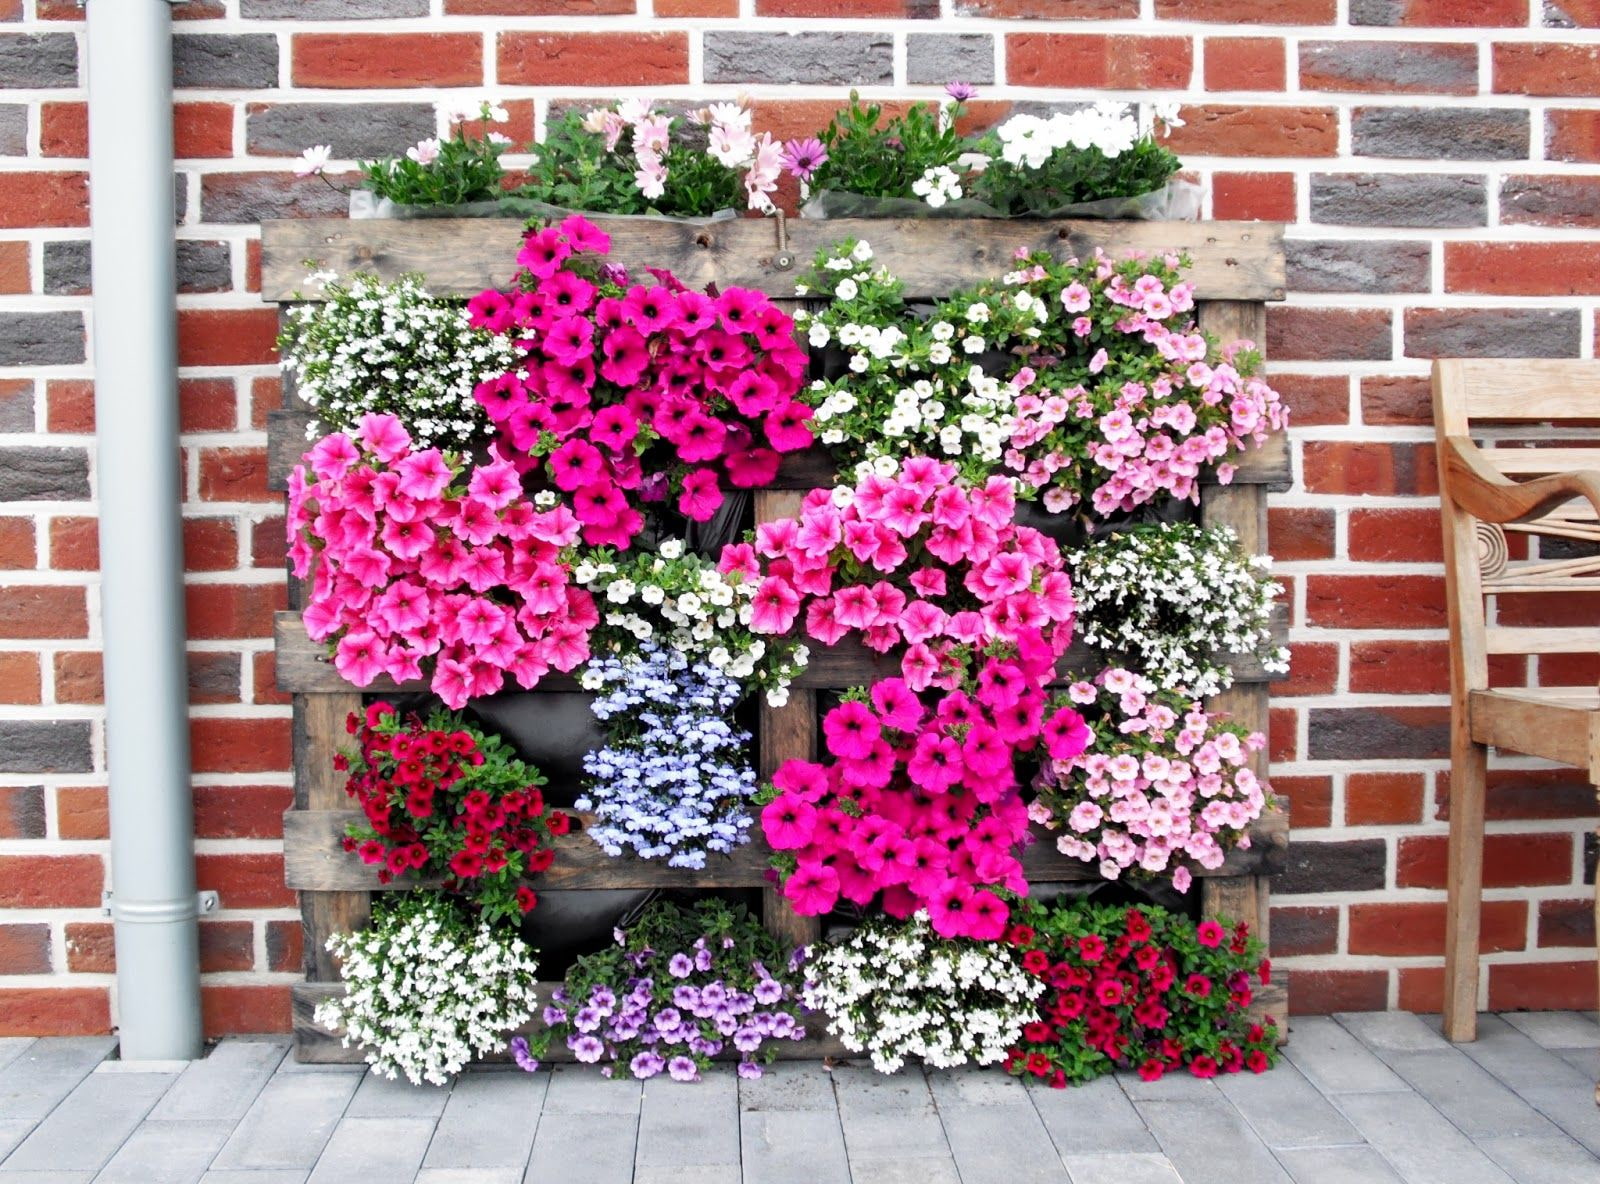 How to make a vertical flower bed?